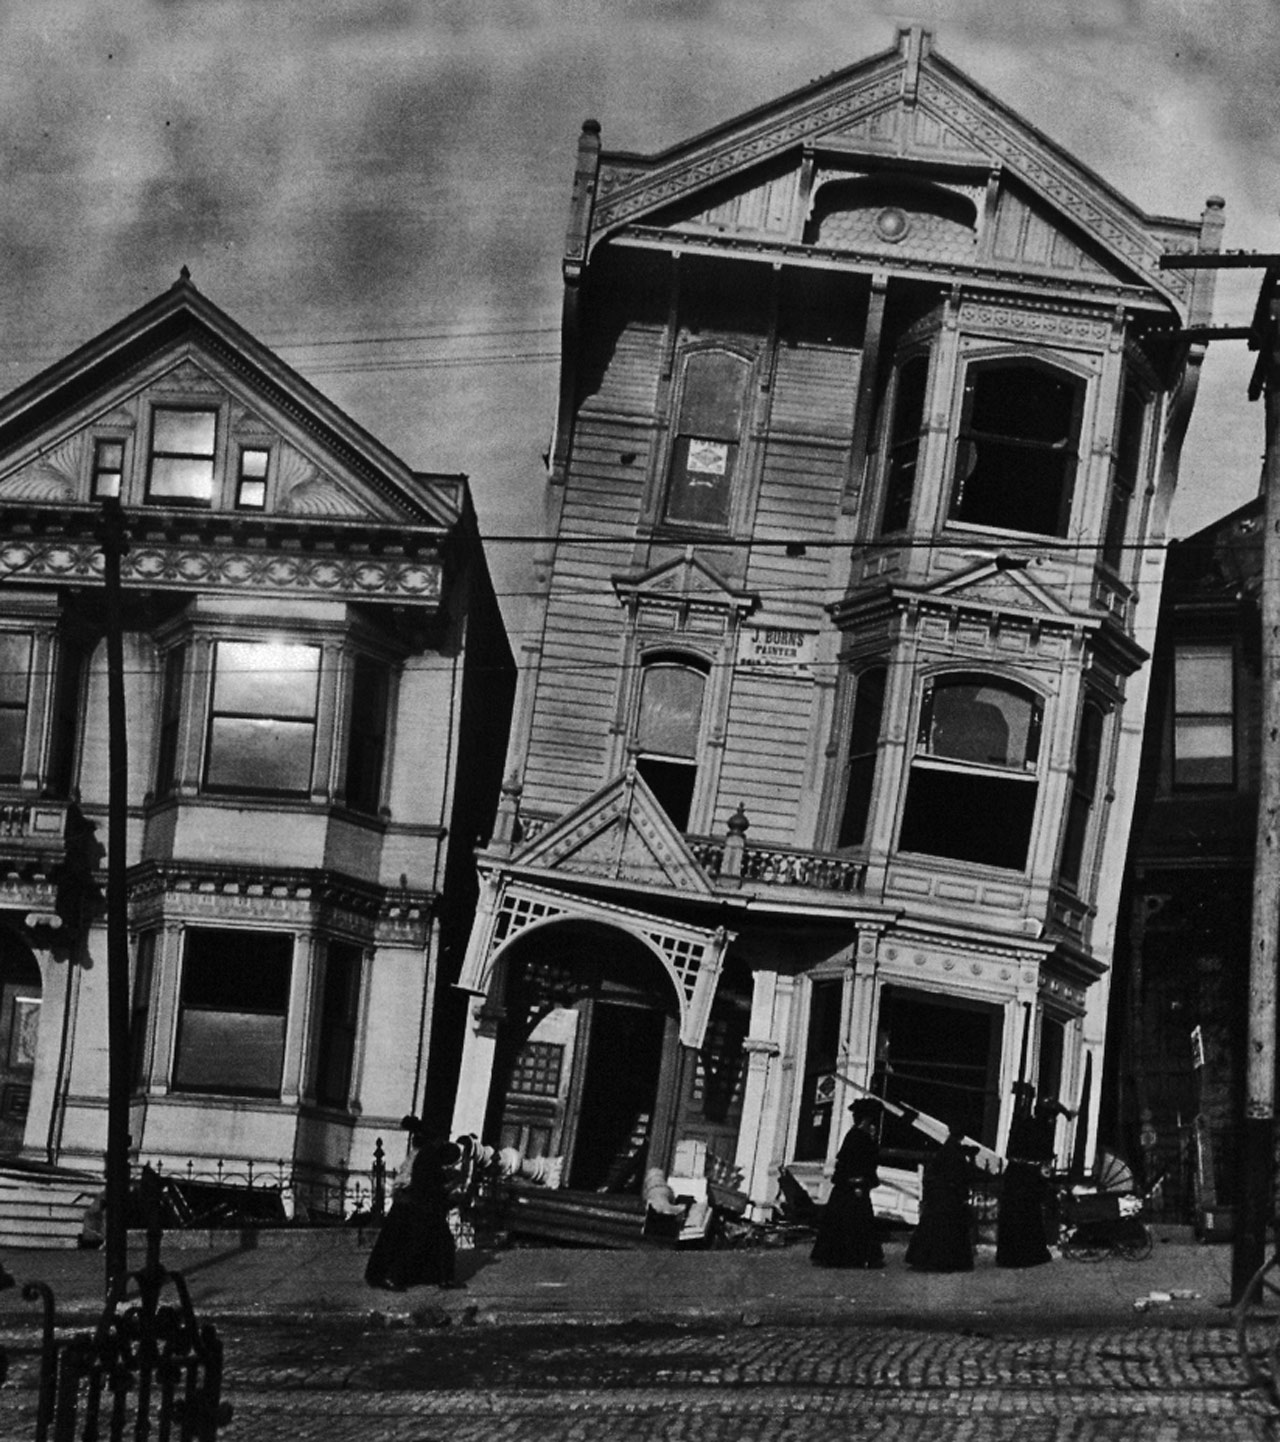 After the earthquake - frame houses tumbled from their foundations, San Francisco Disaster, U.S.A.